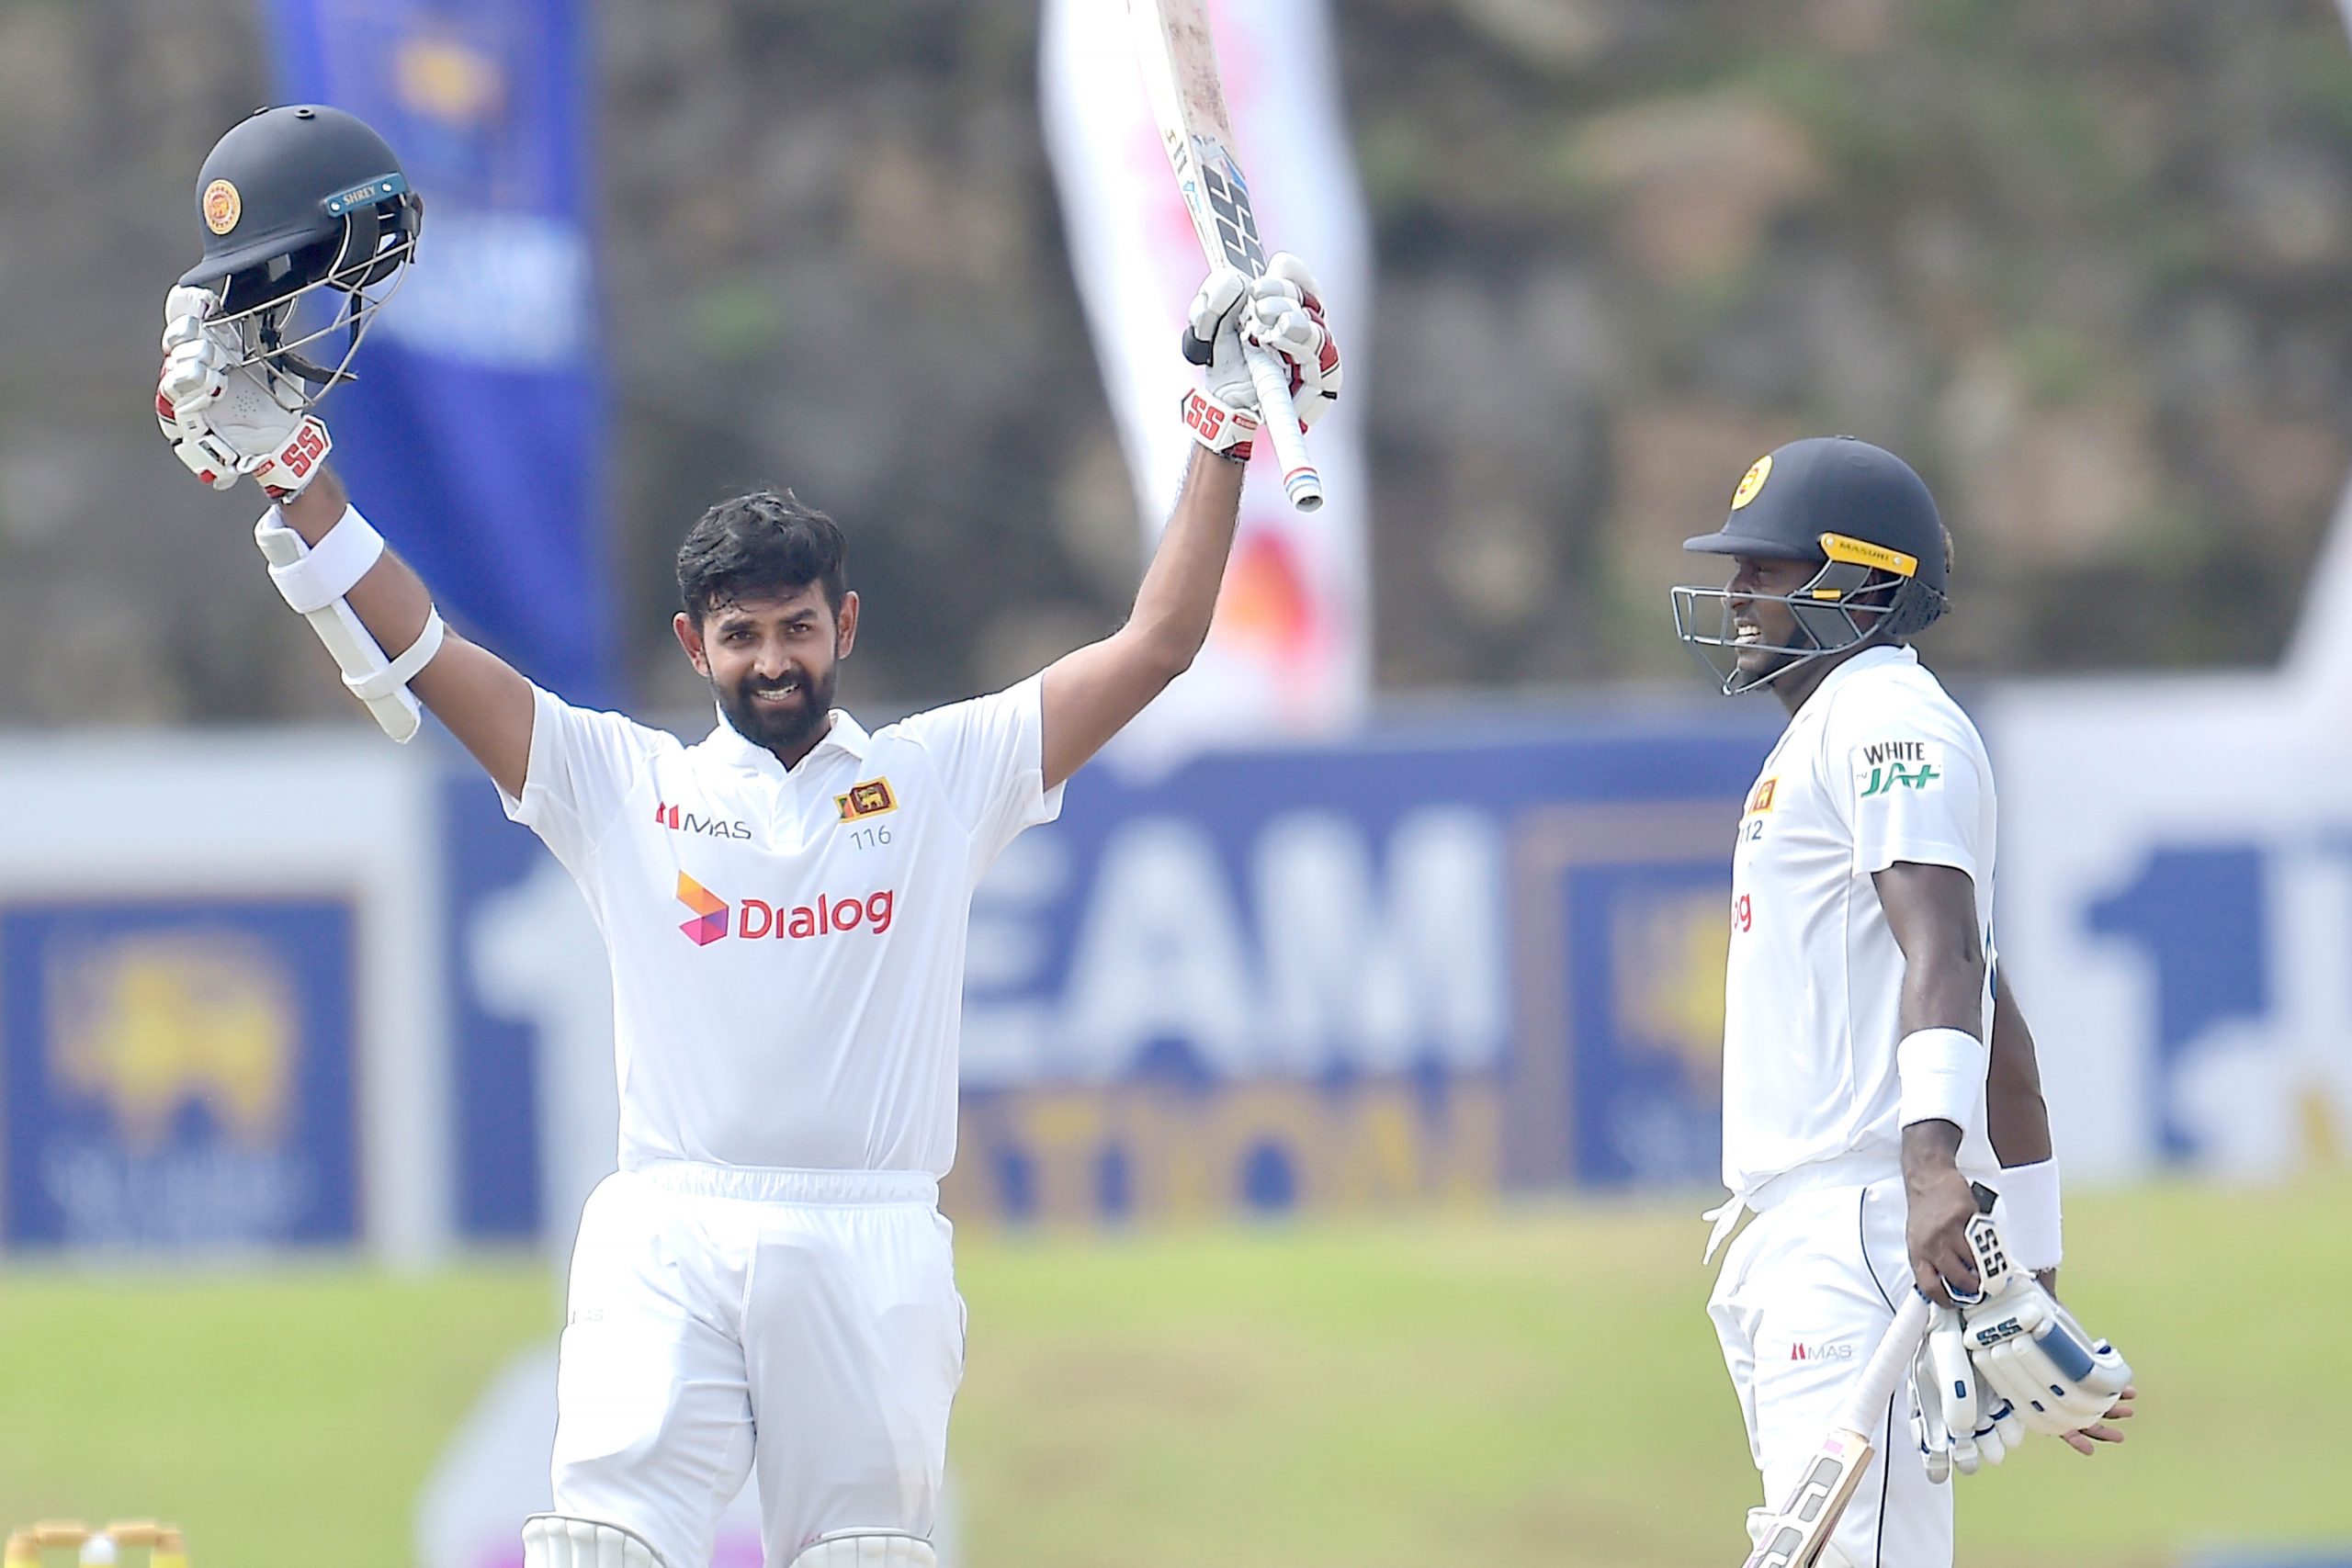 Sri Lanka head coach, batsman test positive for COVID-19, casting doubt over upcoming West Indies tour